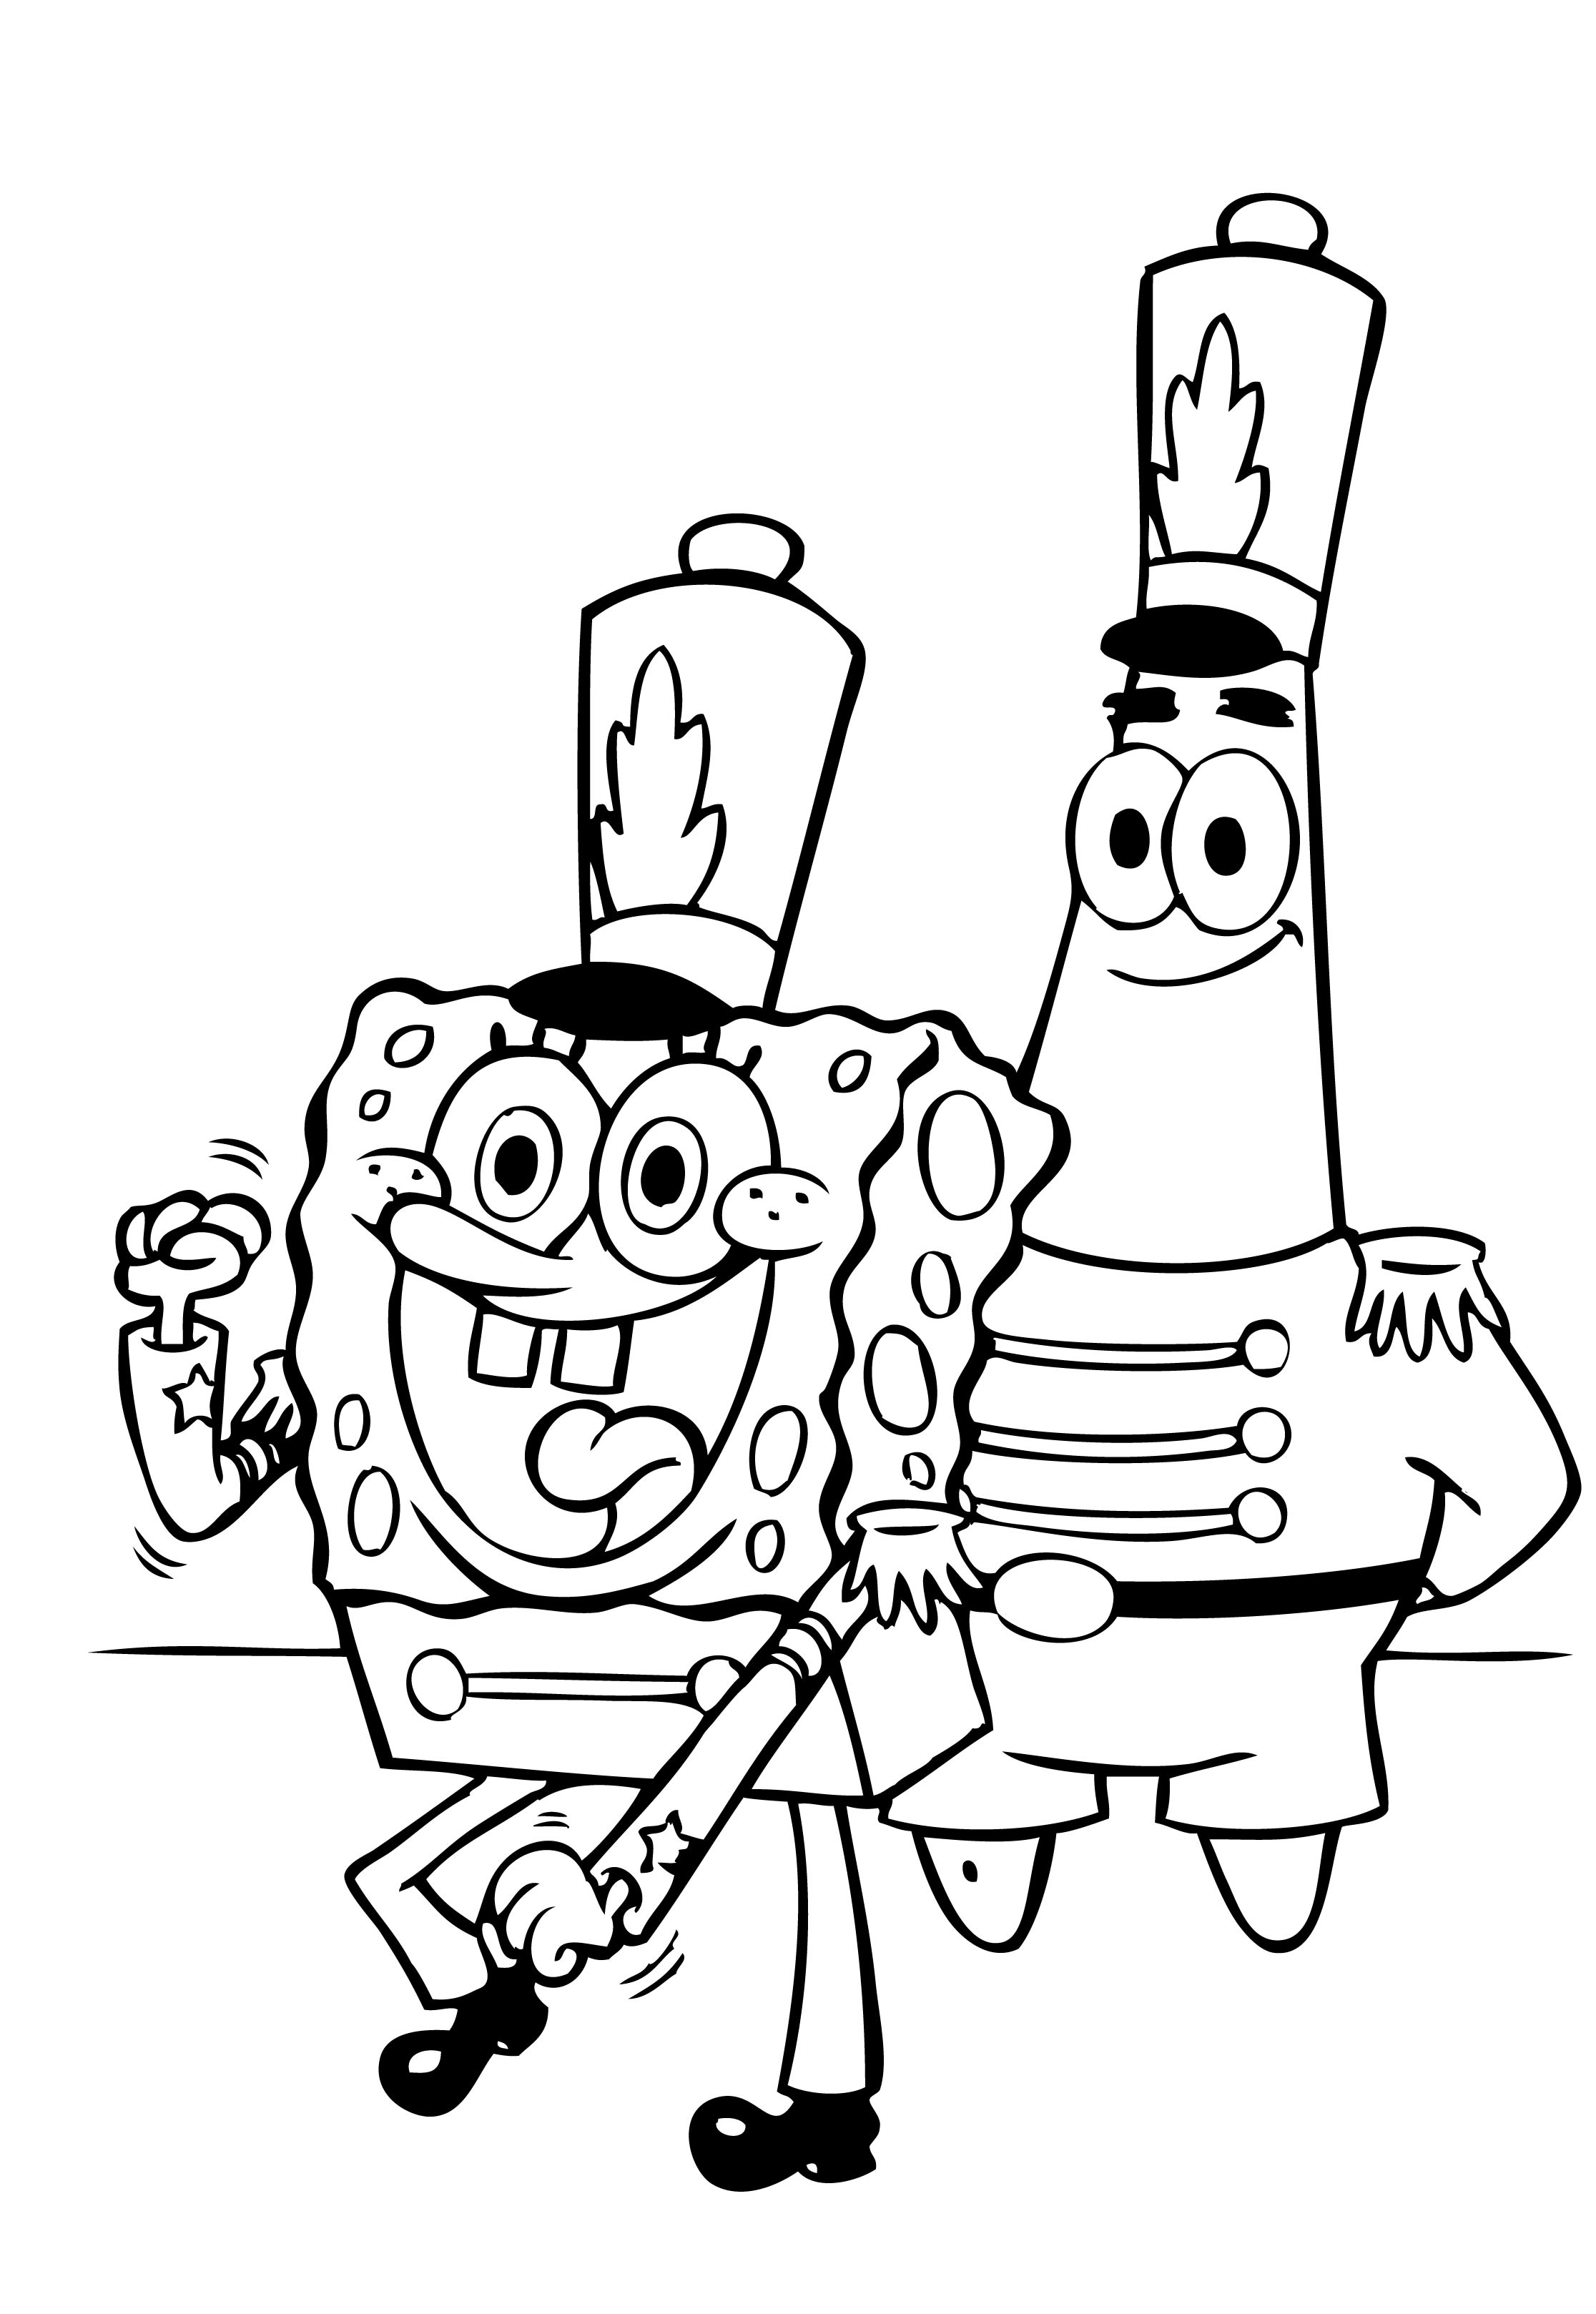 Funny Spongebob Coloring Pages Printables 67